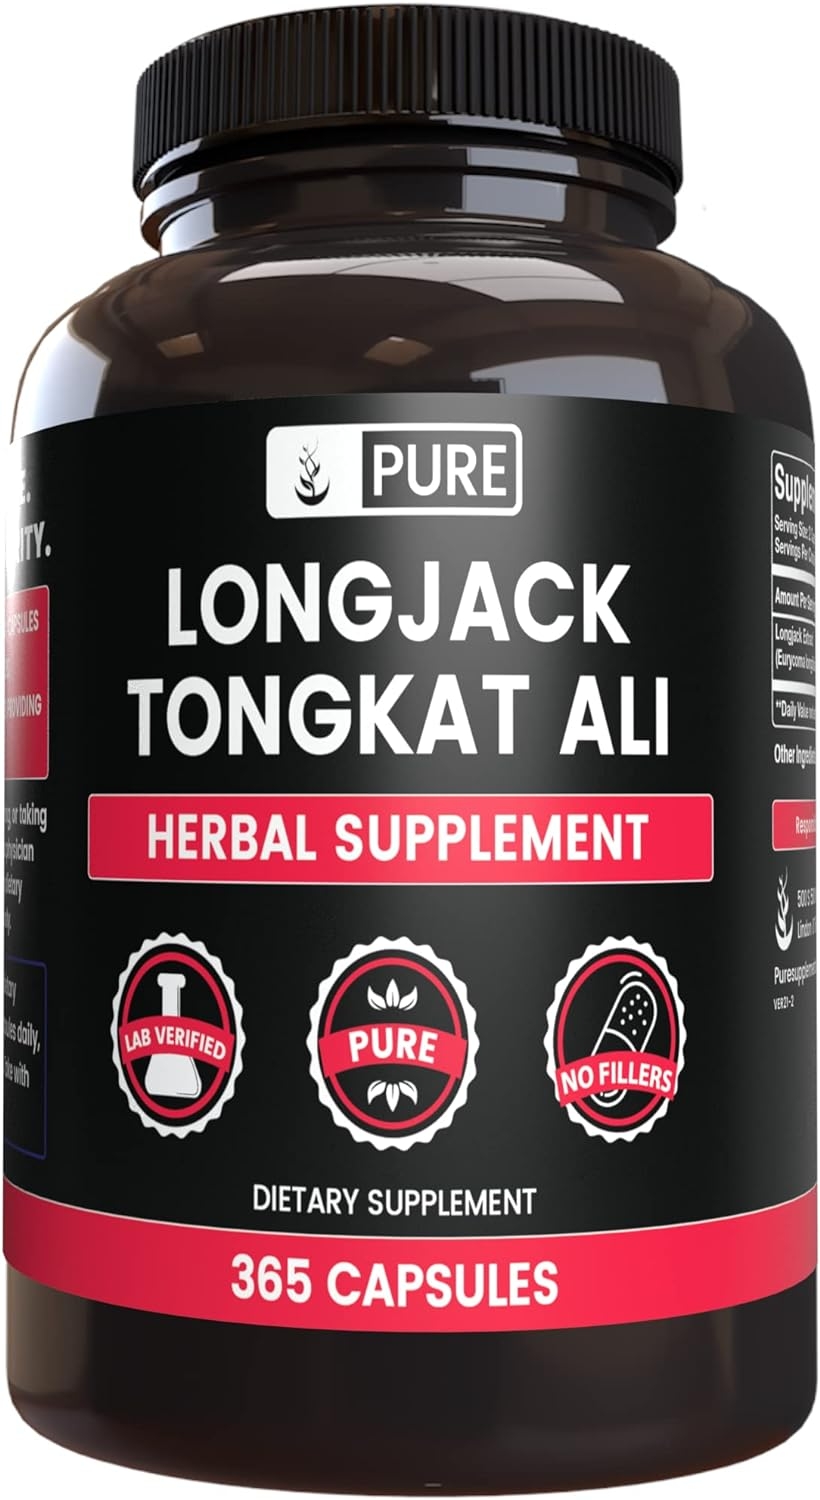 Longjack Tongkat Ali (365 Capsules) Naturally Sourced, Non-GMO & Gluten-Free, Made in The USA (1520 mg Serving)